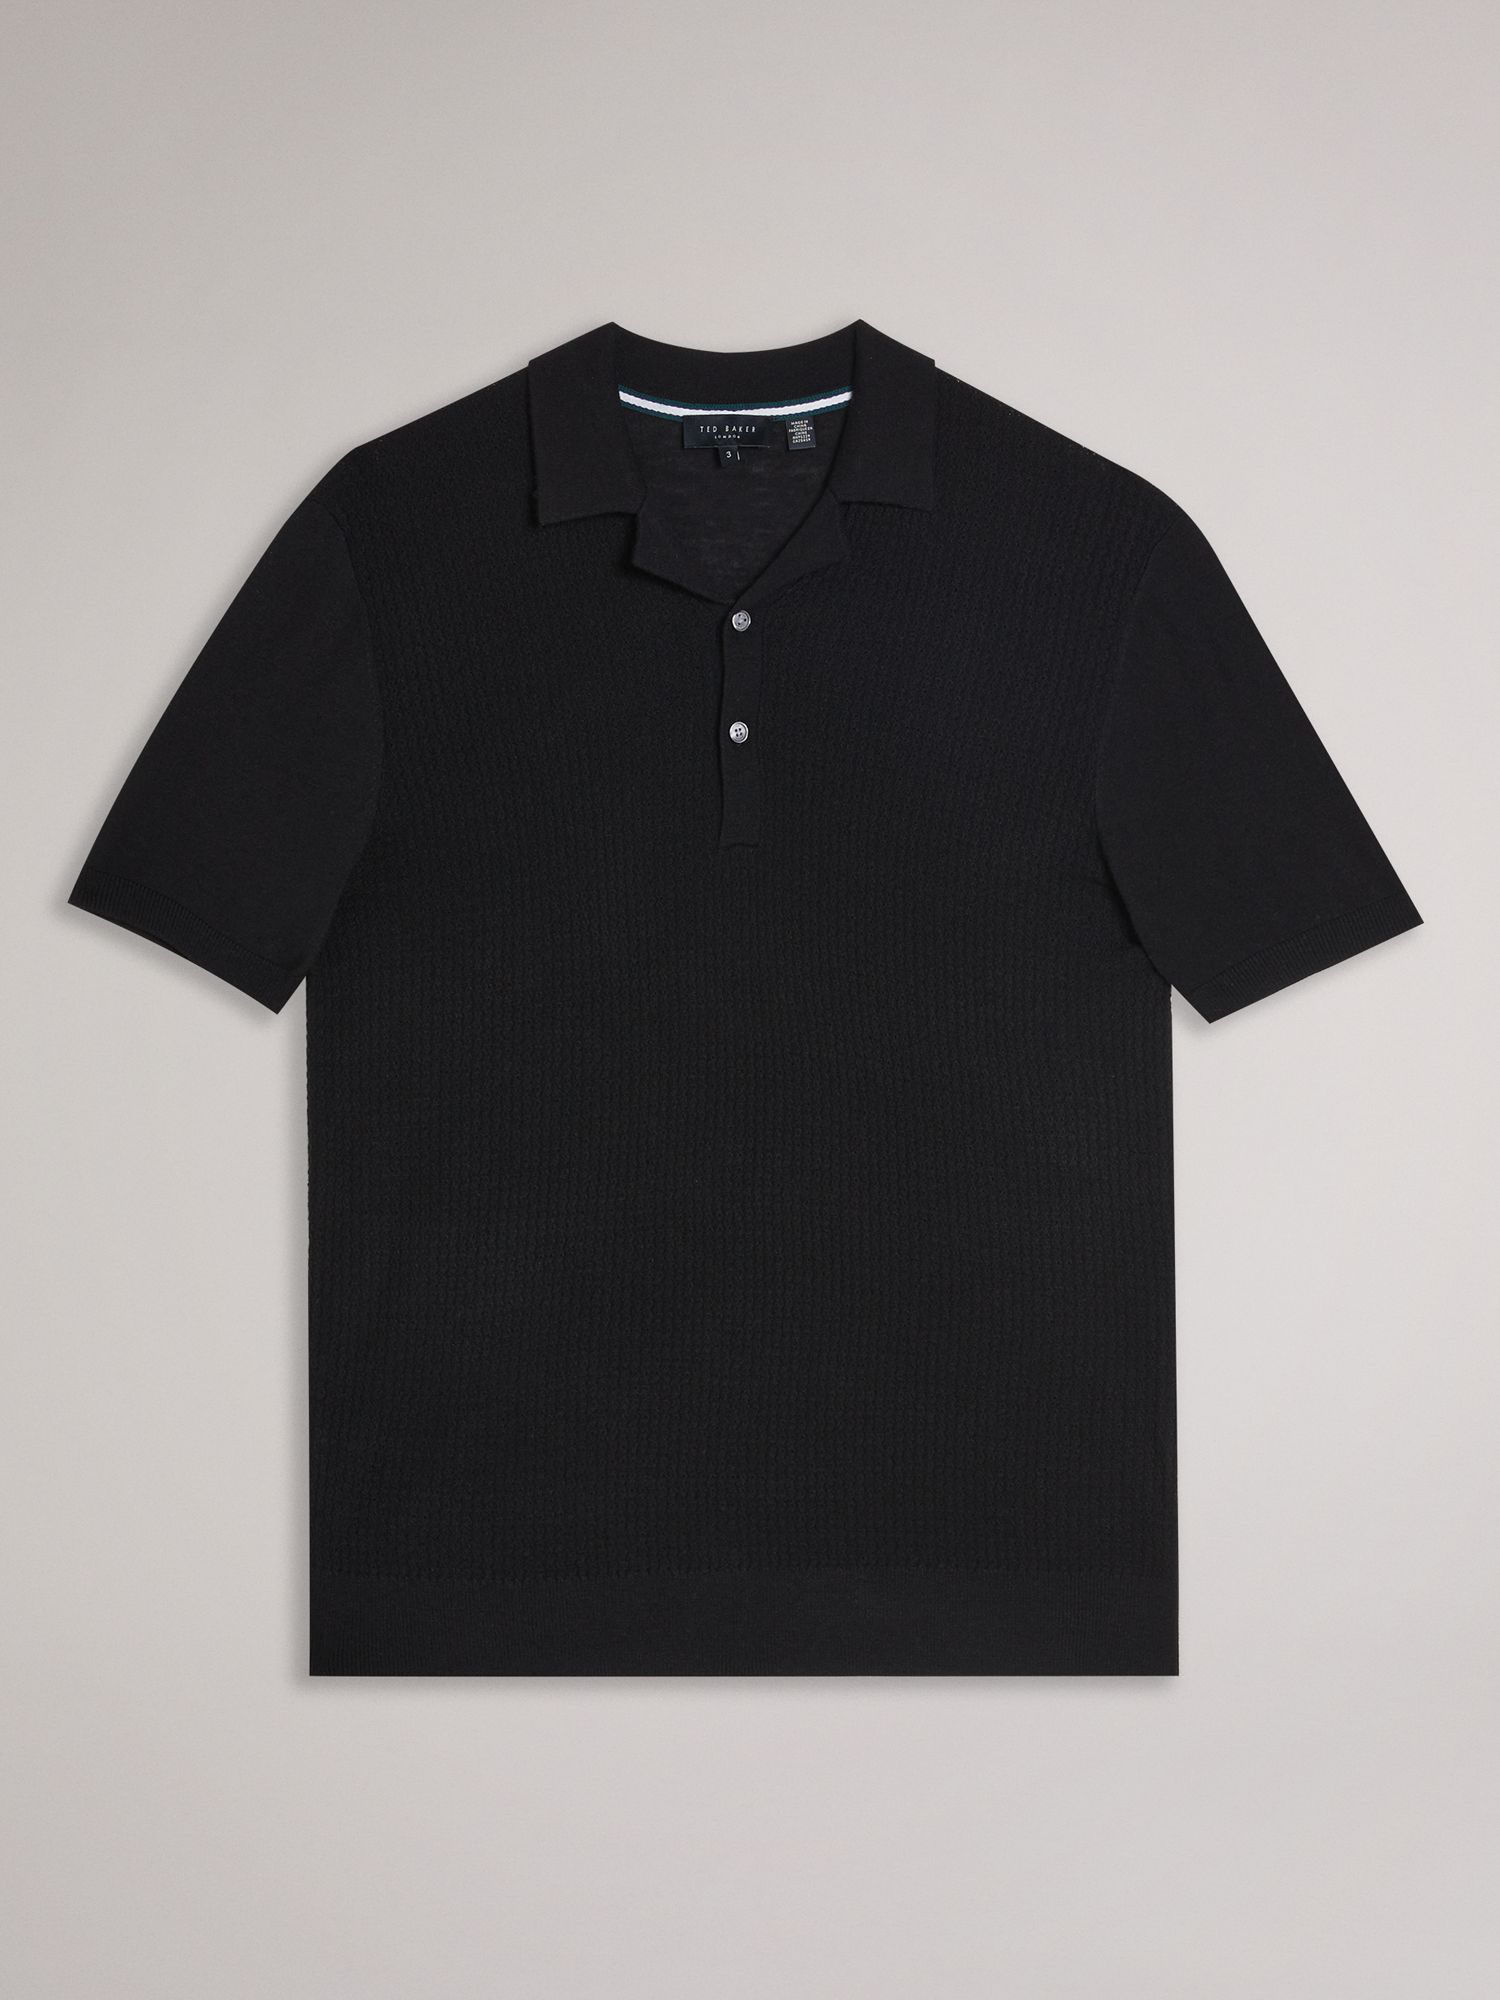 Ted Baker Adio Textured Front Polo Shirt, Black, XL